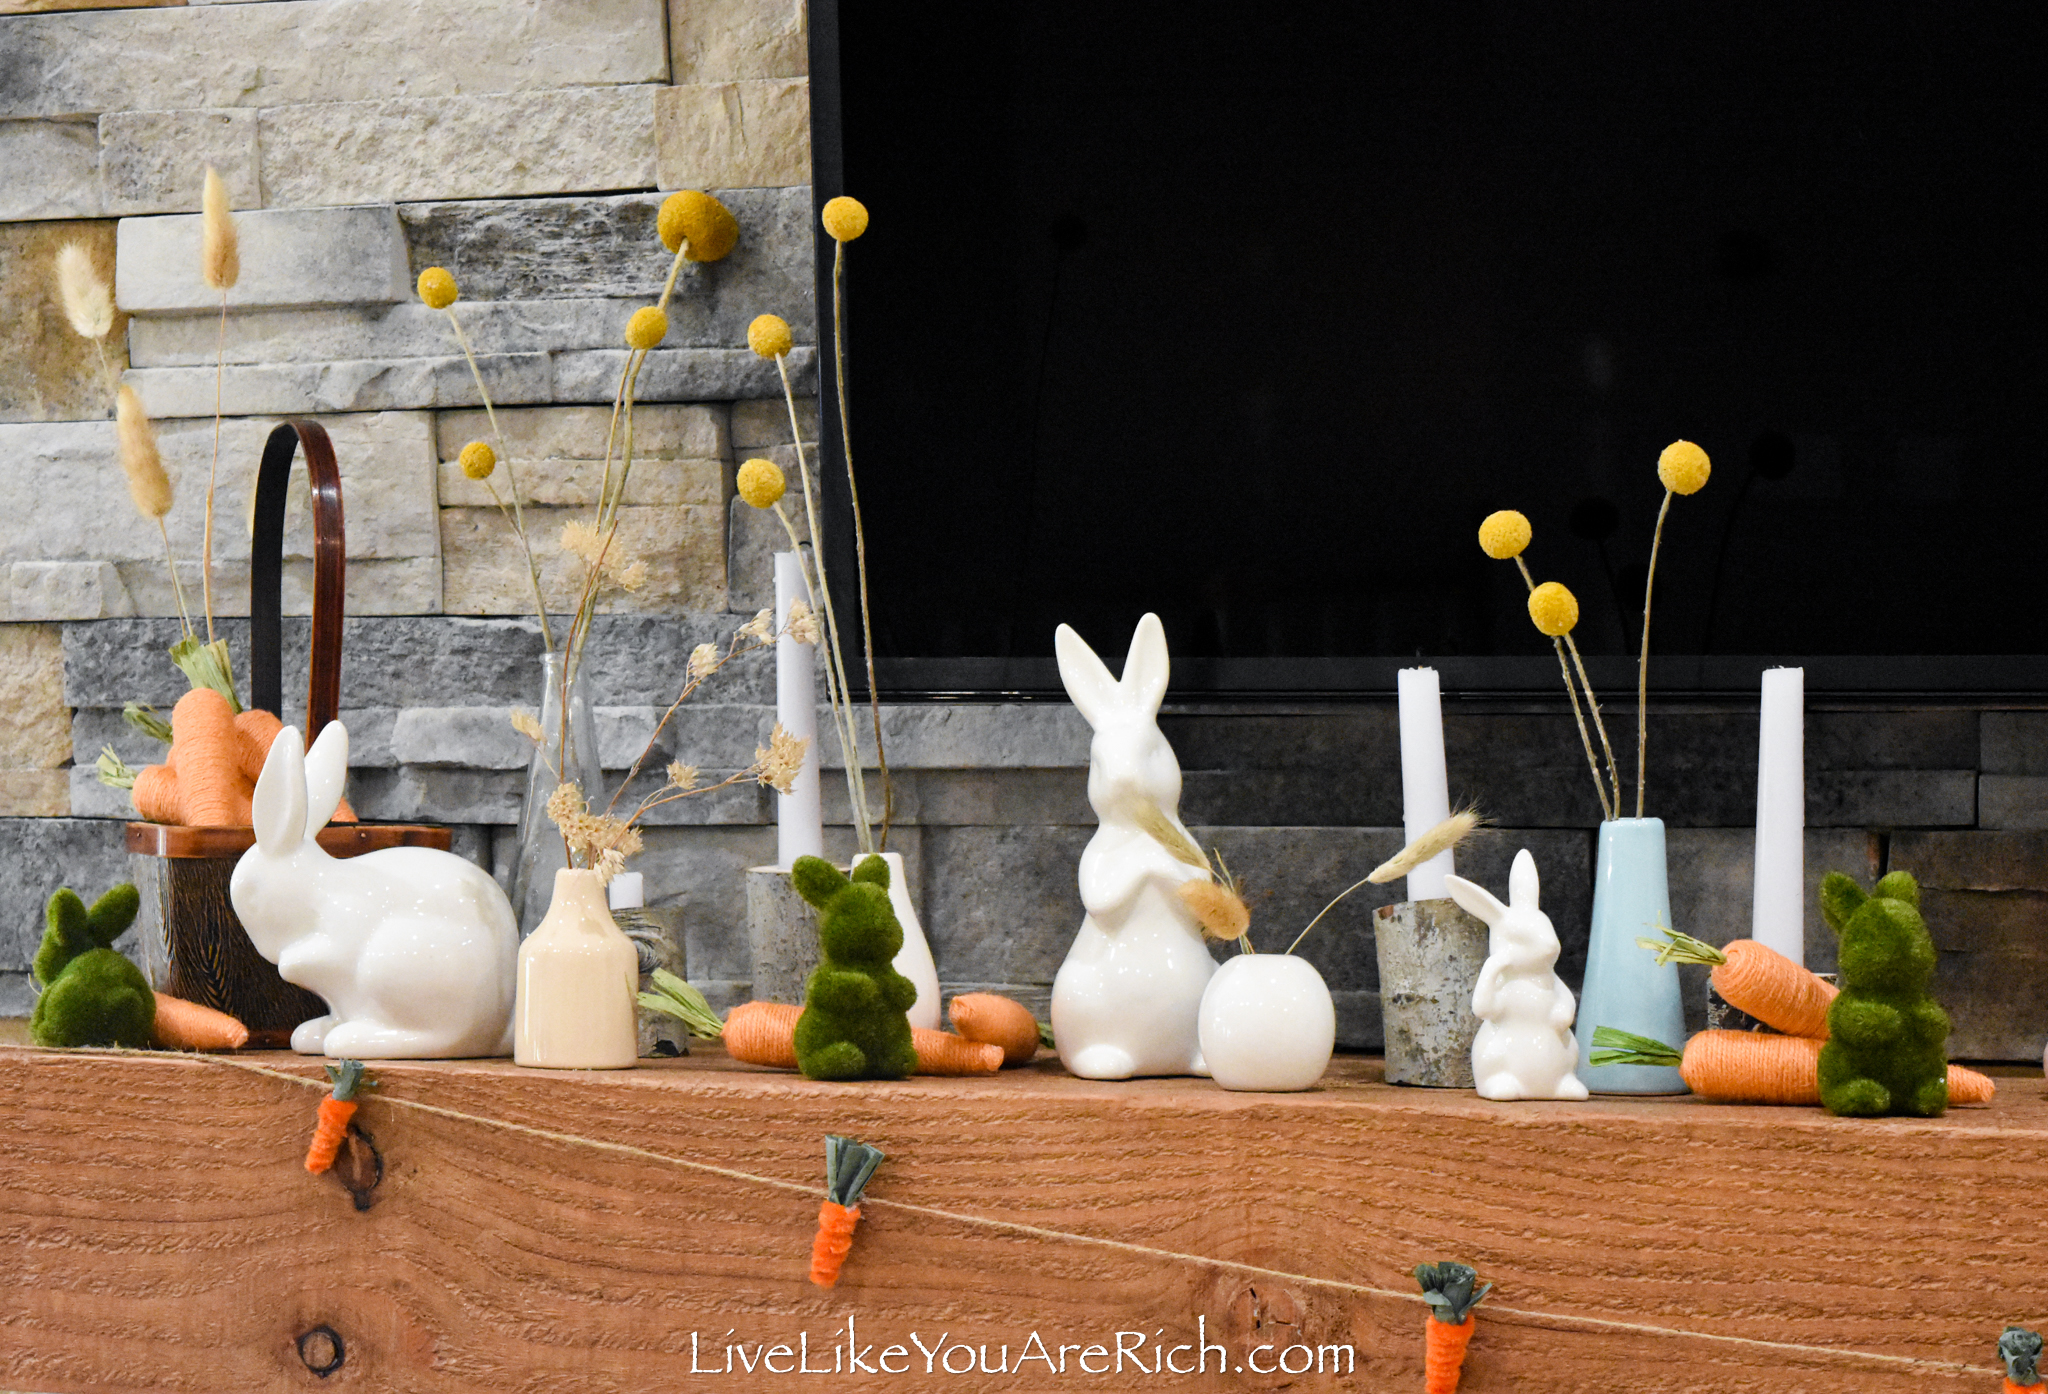 What glass bunnies